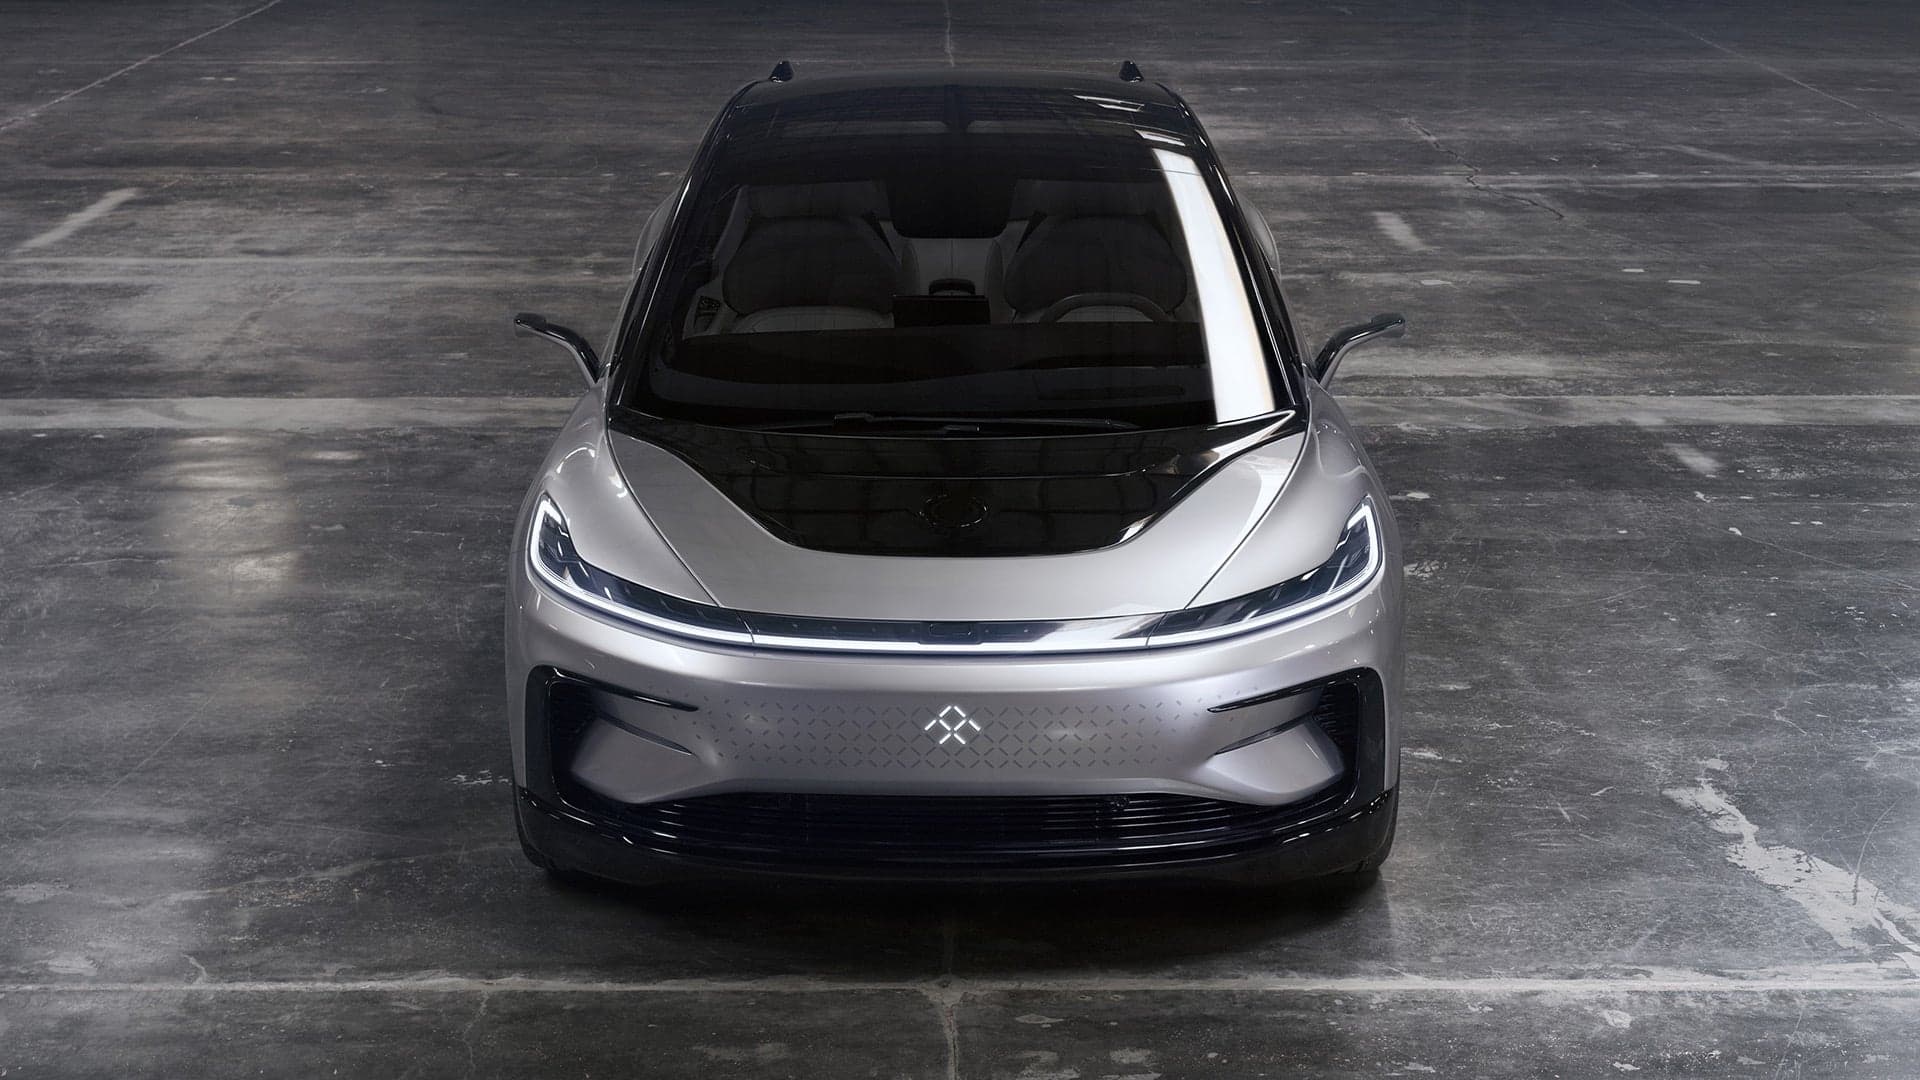 EV Startup Faraday Future Seeks to Oust Investor Who Defaulted on Payment